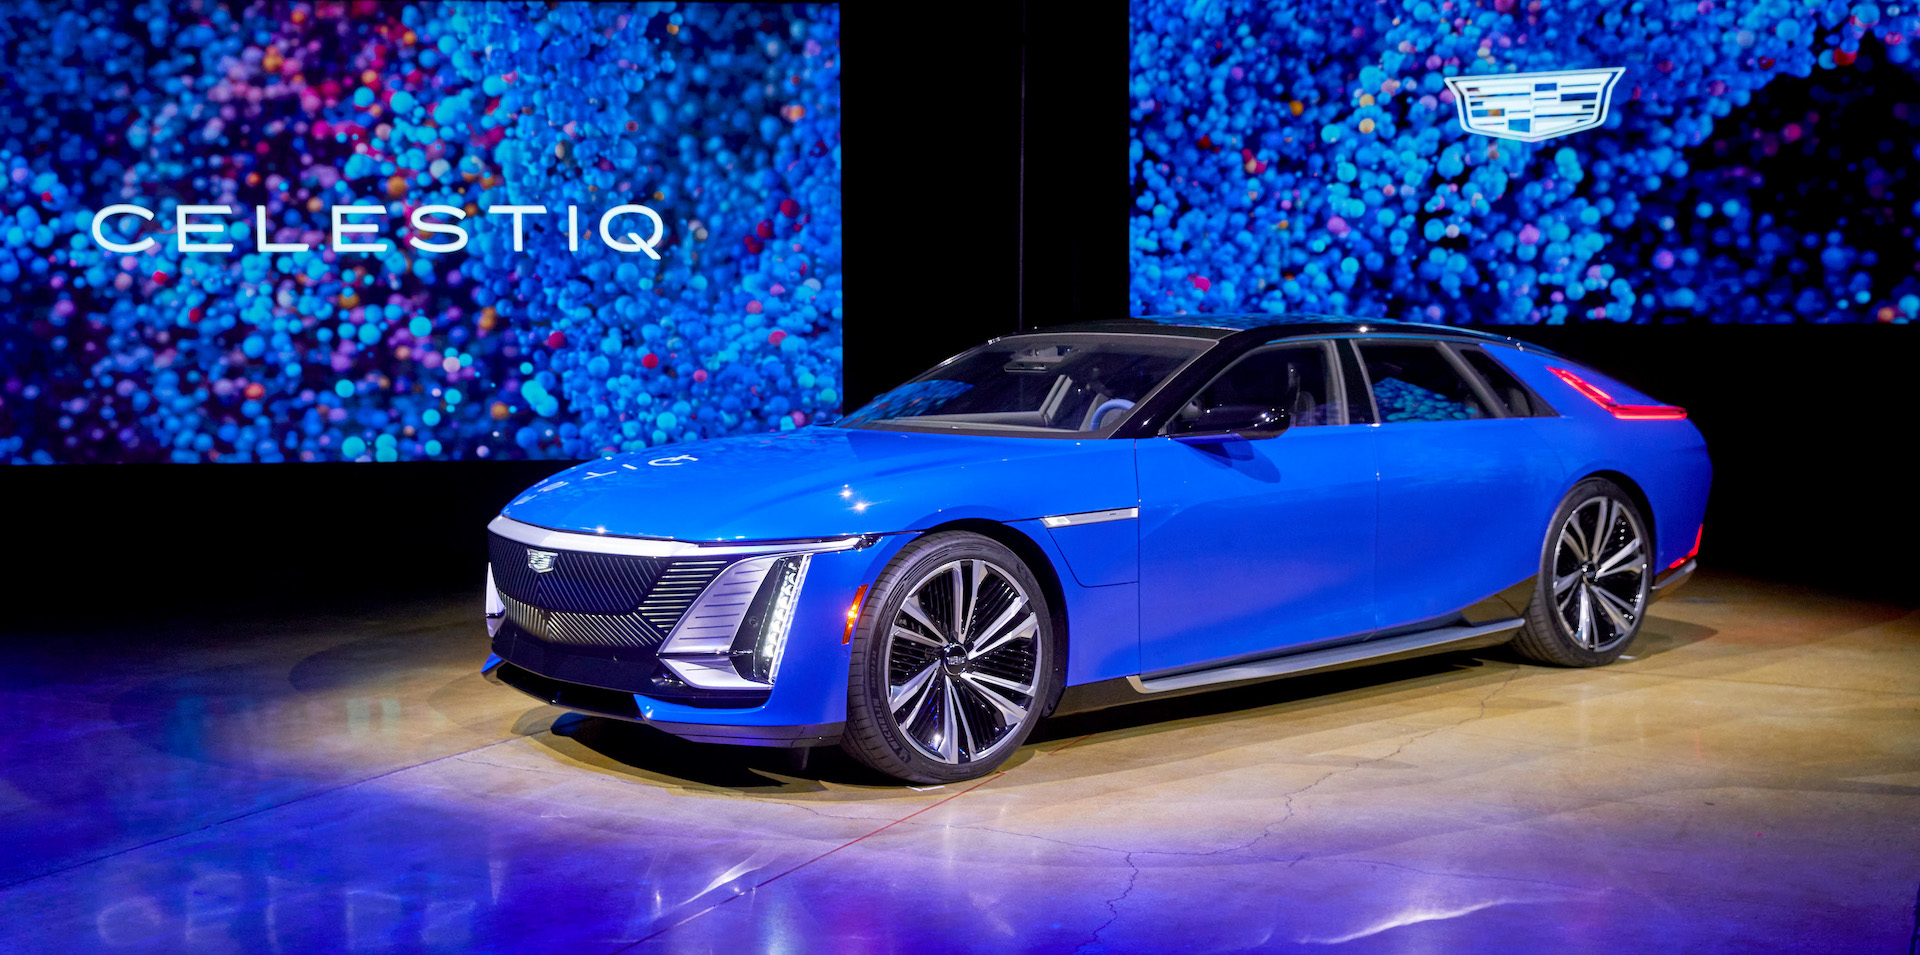 Three Cadillac EVs to debut in 2023, begin gross sales in 2024